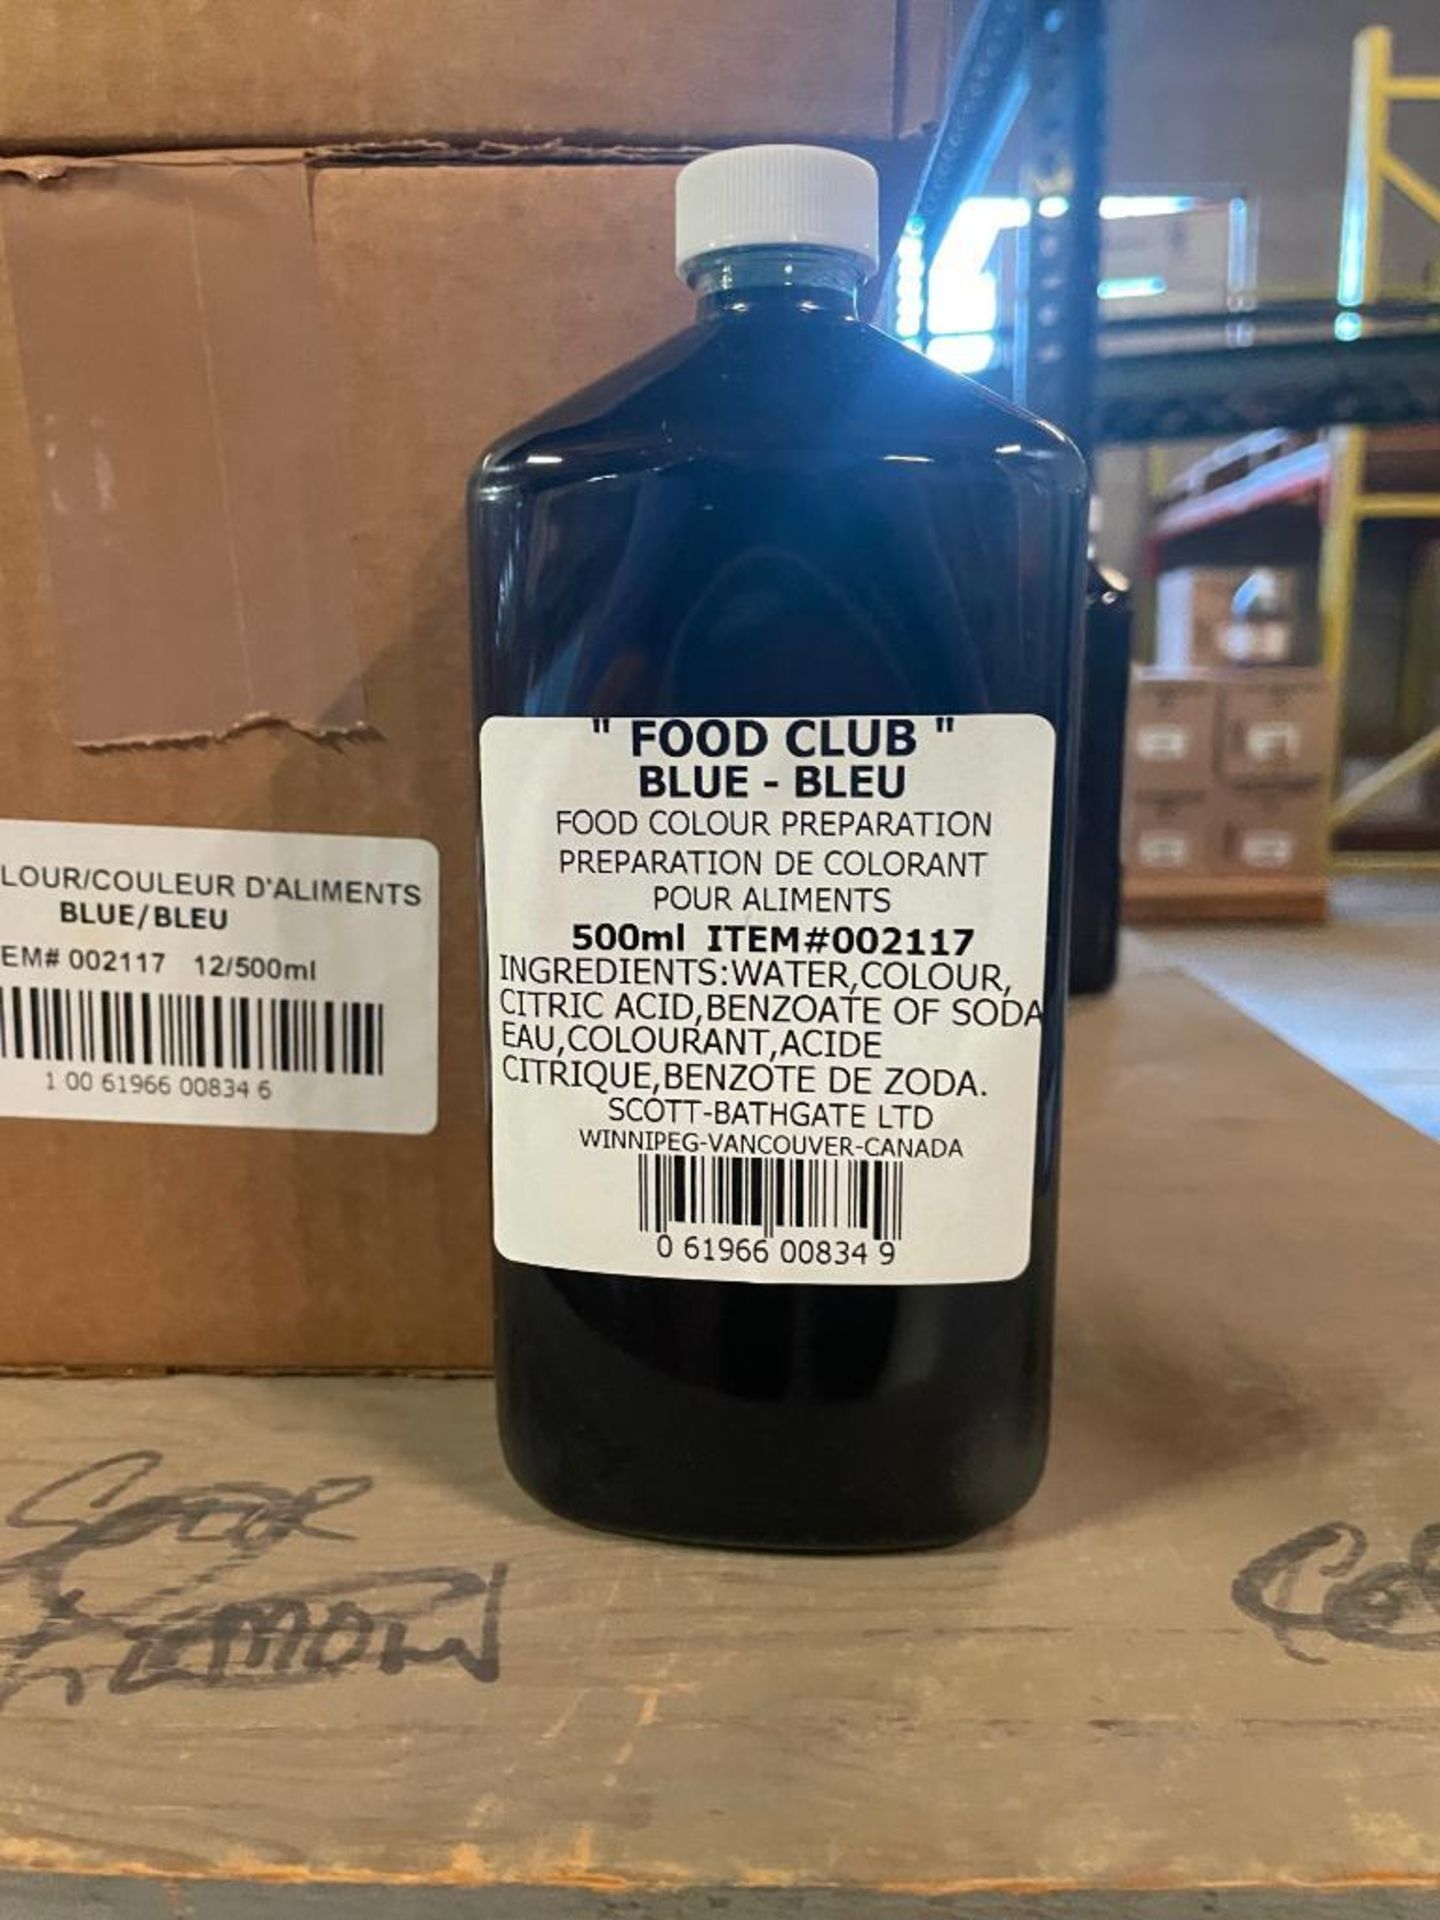 (2) BOXES OF FOOD CLUB BLUE FOOD COLOUR PREPARATION, 12/500ML BOTTLES PER BOX - Image 2 of 2